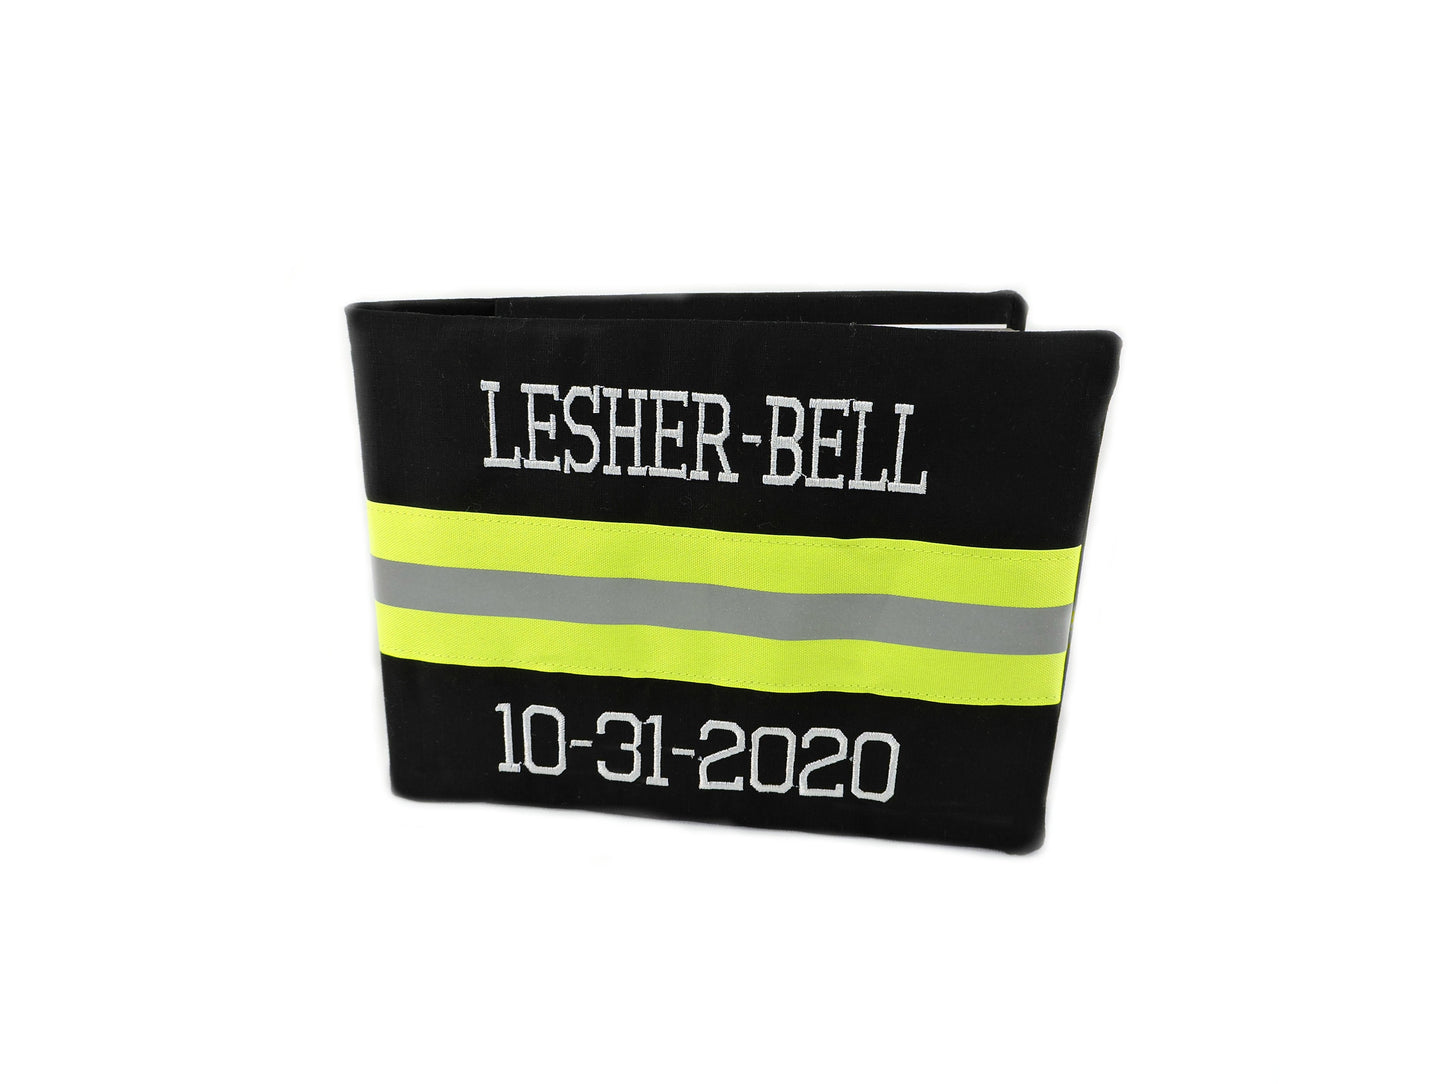 Black Fabric and Neon Yellow Reflective Tape Firefighter Wedding Guestbook with a name and wedding date added